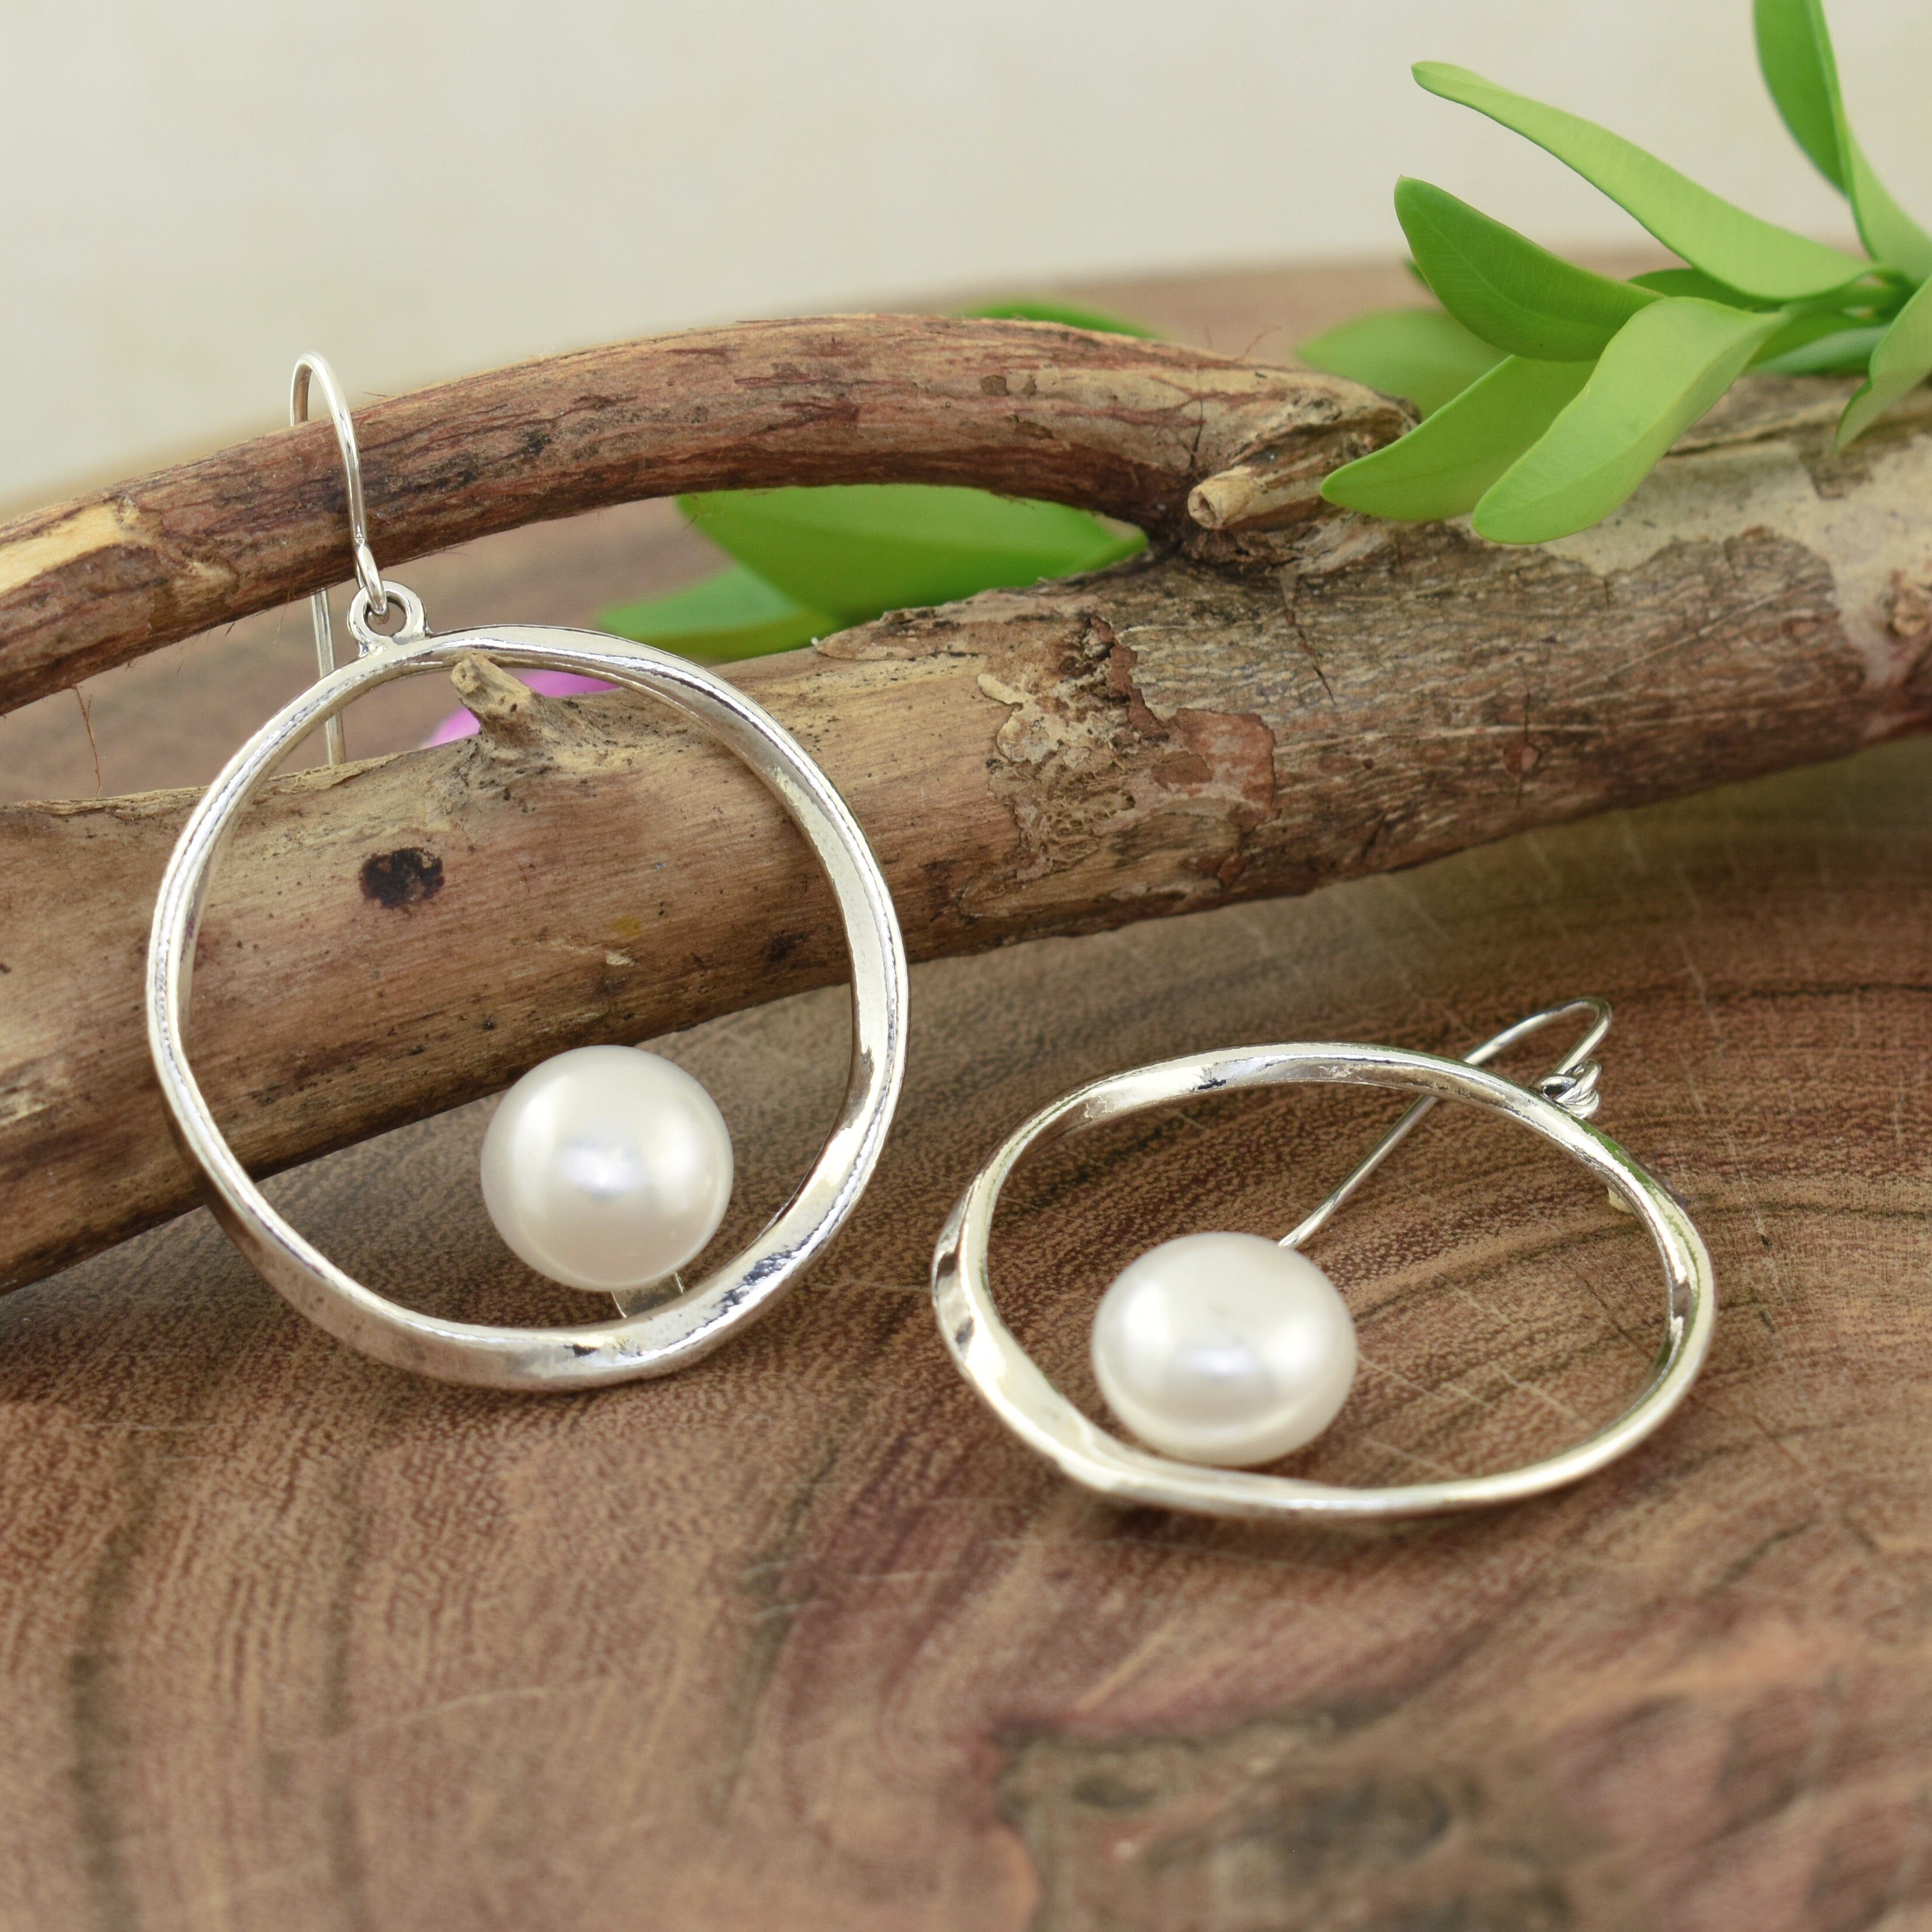 Round sterling silver earrings with pearl accent